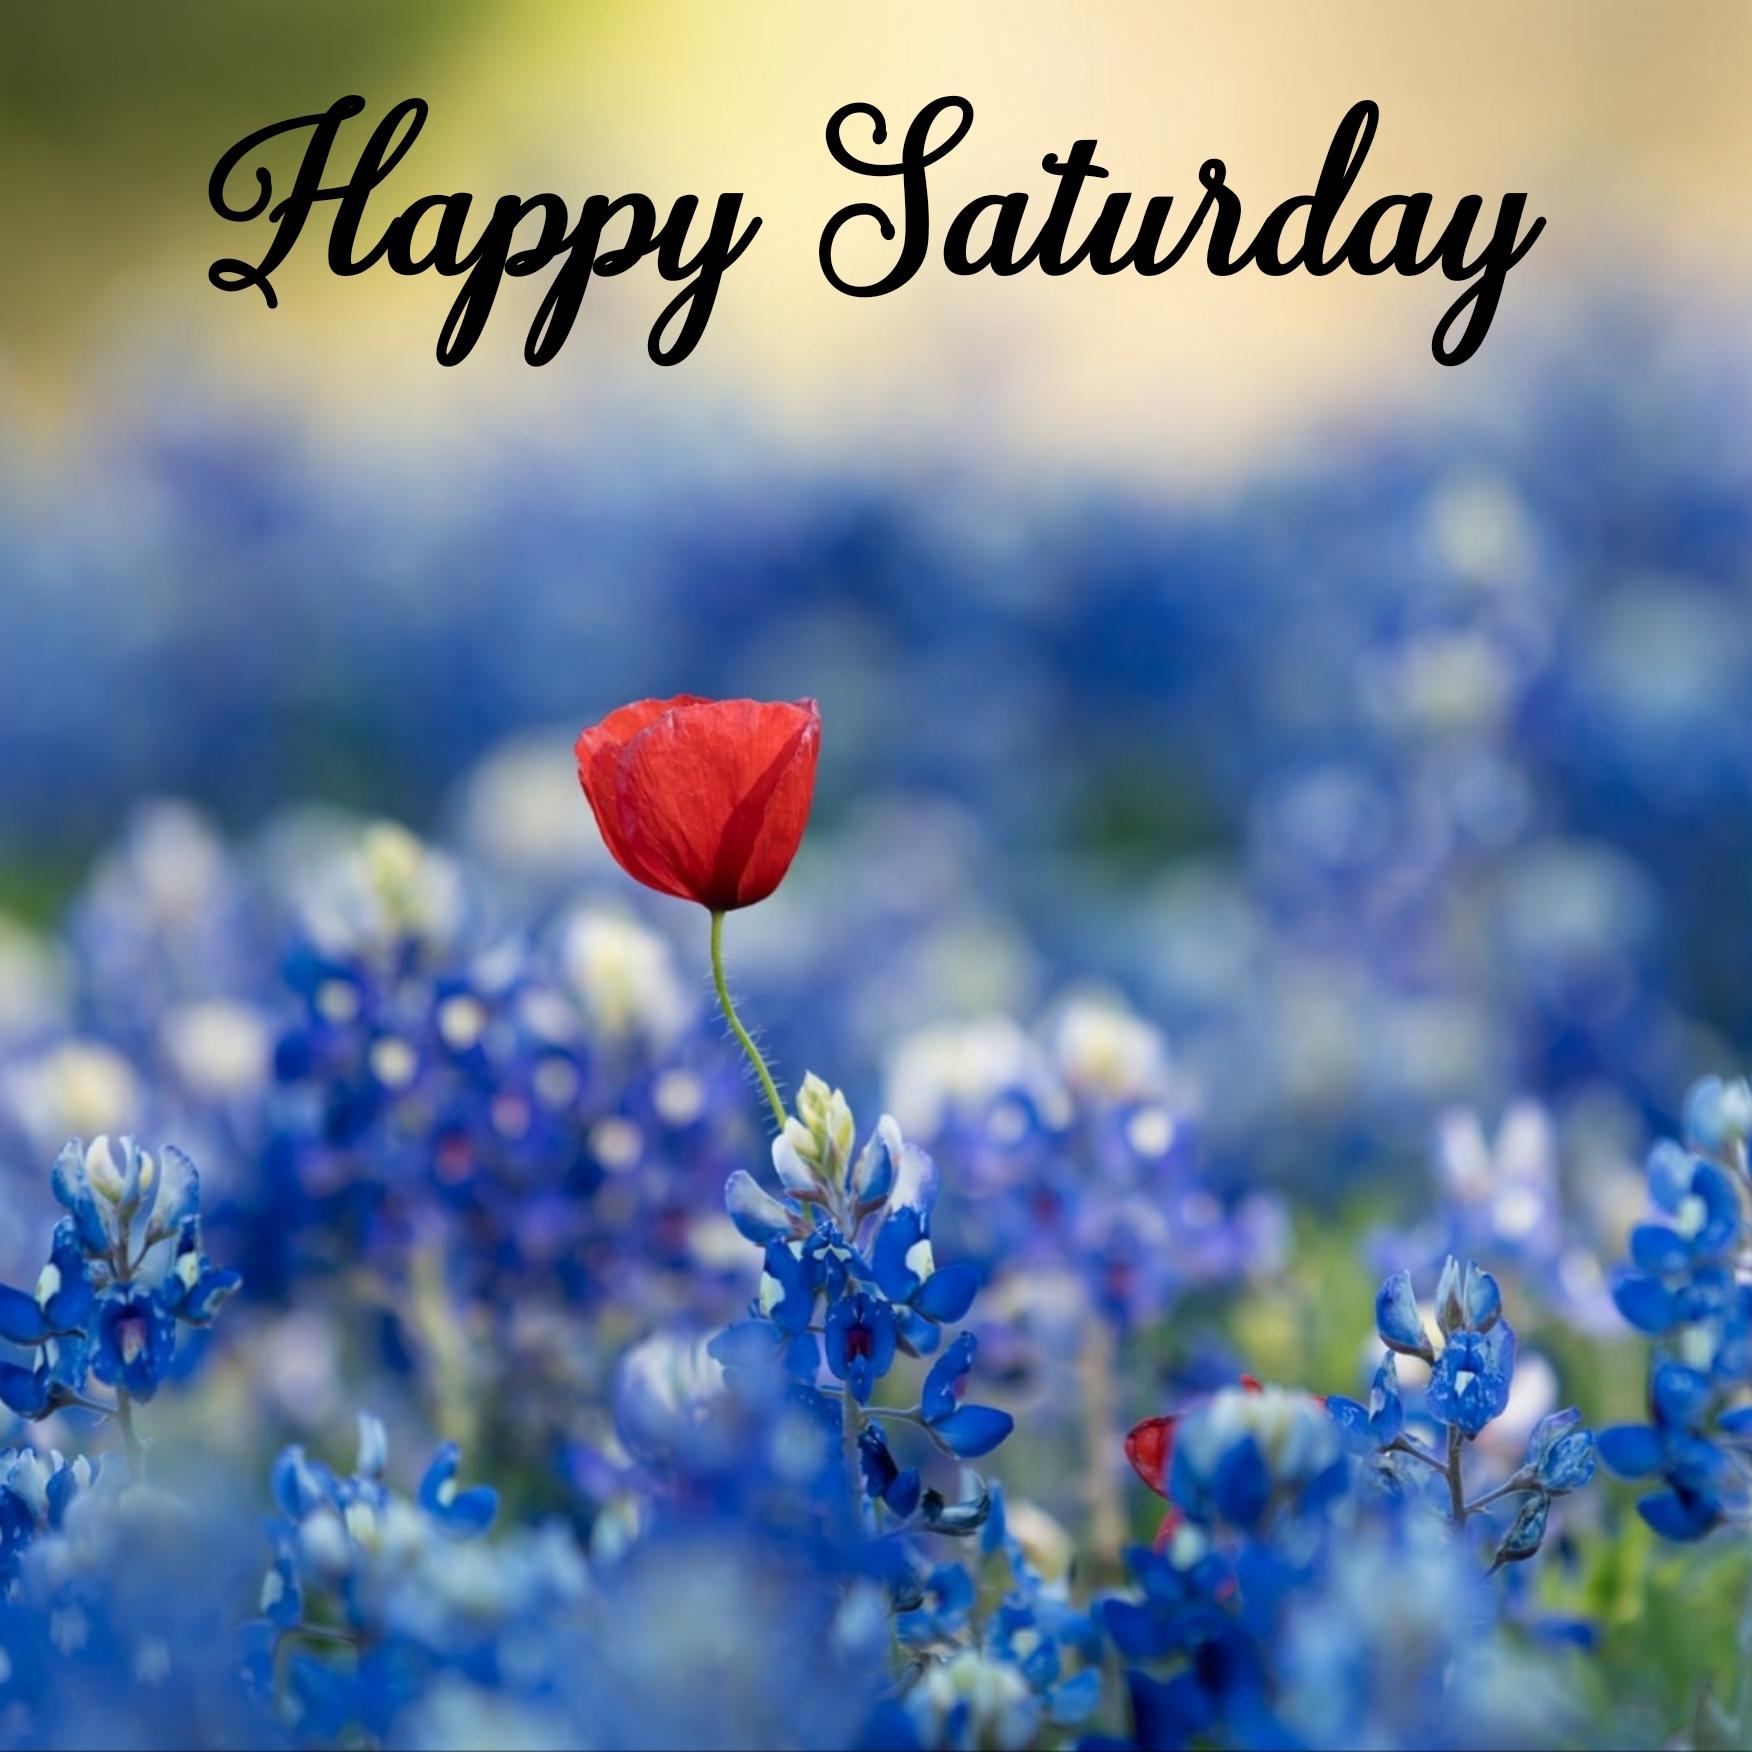 Happy Saturday Images for Whatsapp